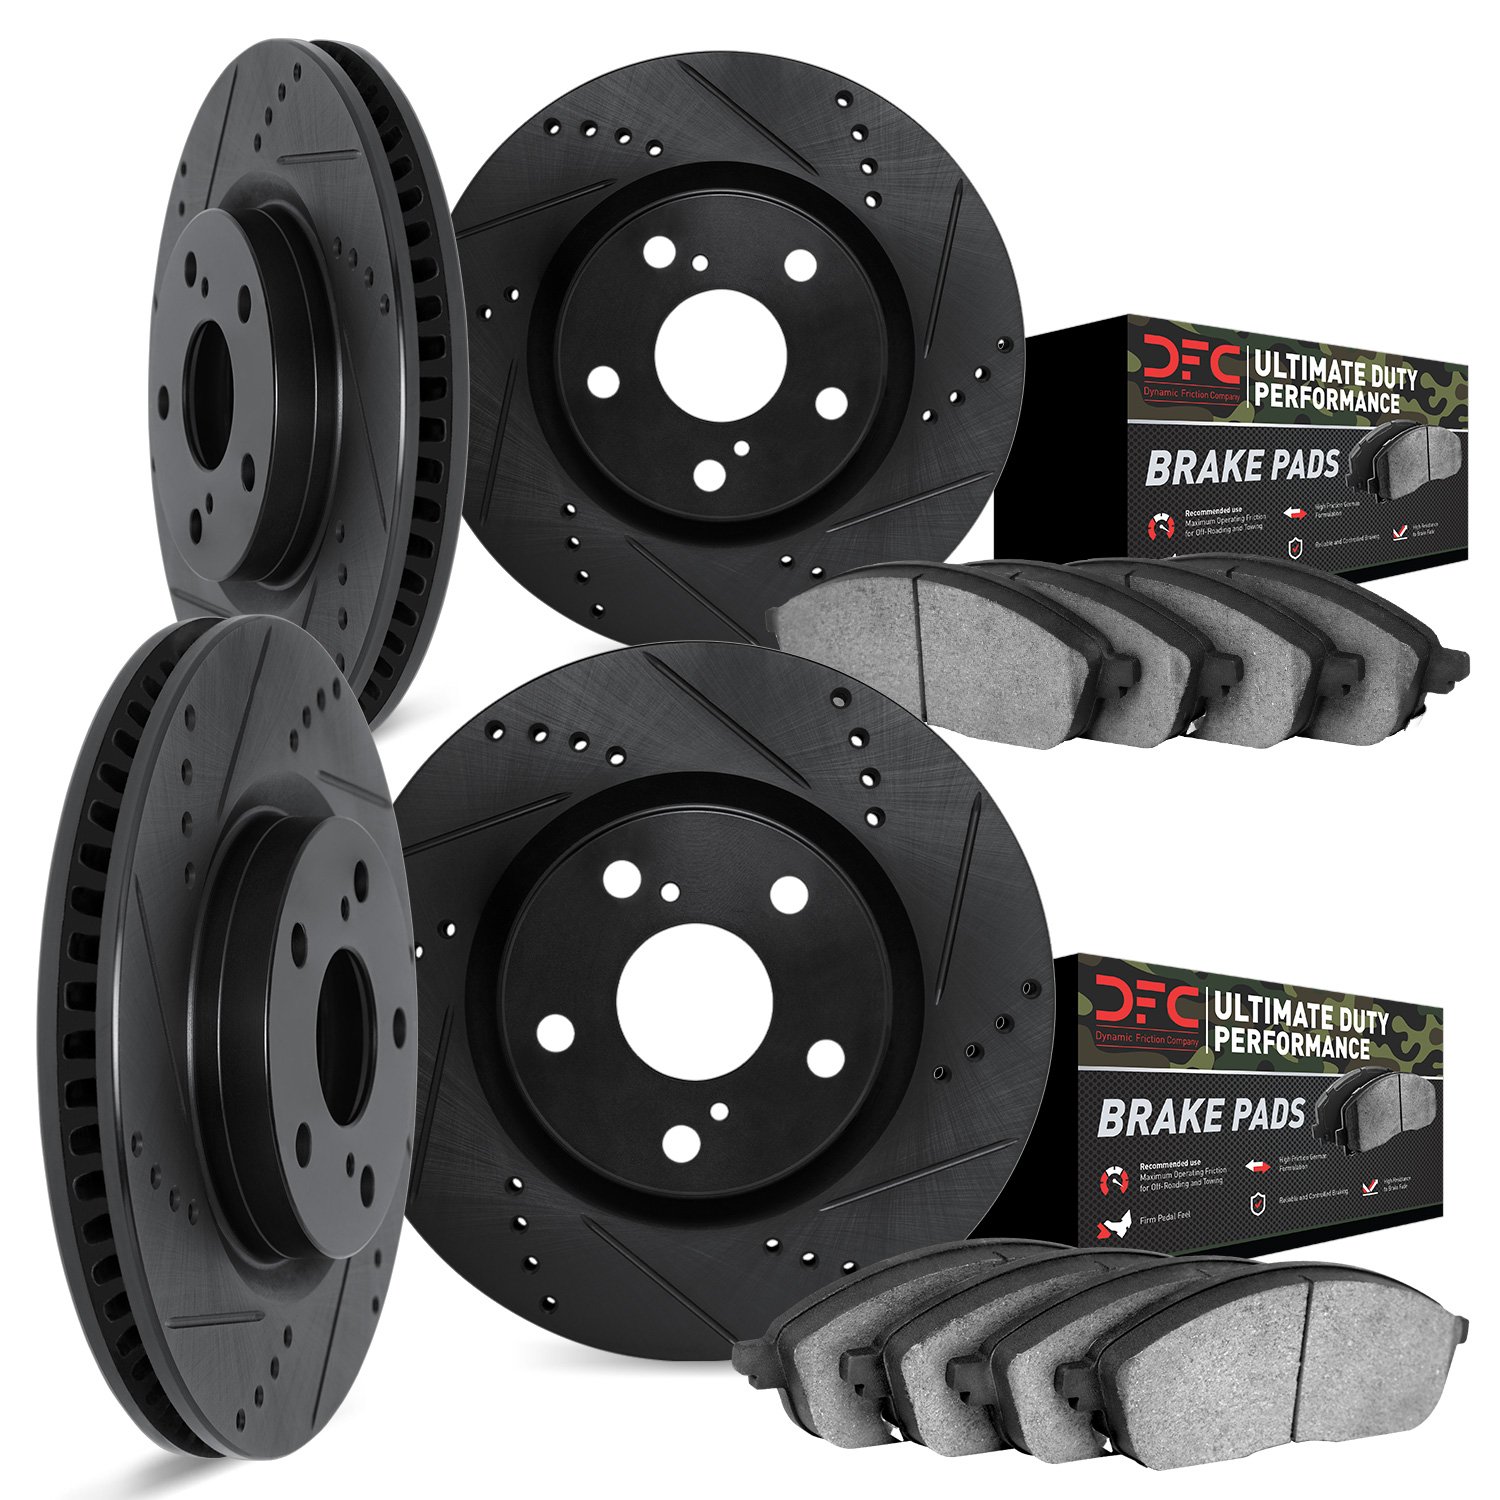 8404-42005 Drilled/Slotted Brake Rotors with Ultimate-Duty Brake Pads Kit [Black], Fits Select Mopar, Position: Front and Rear